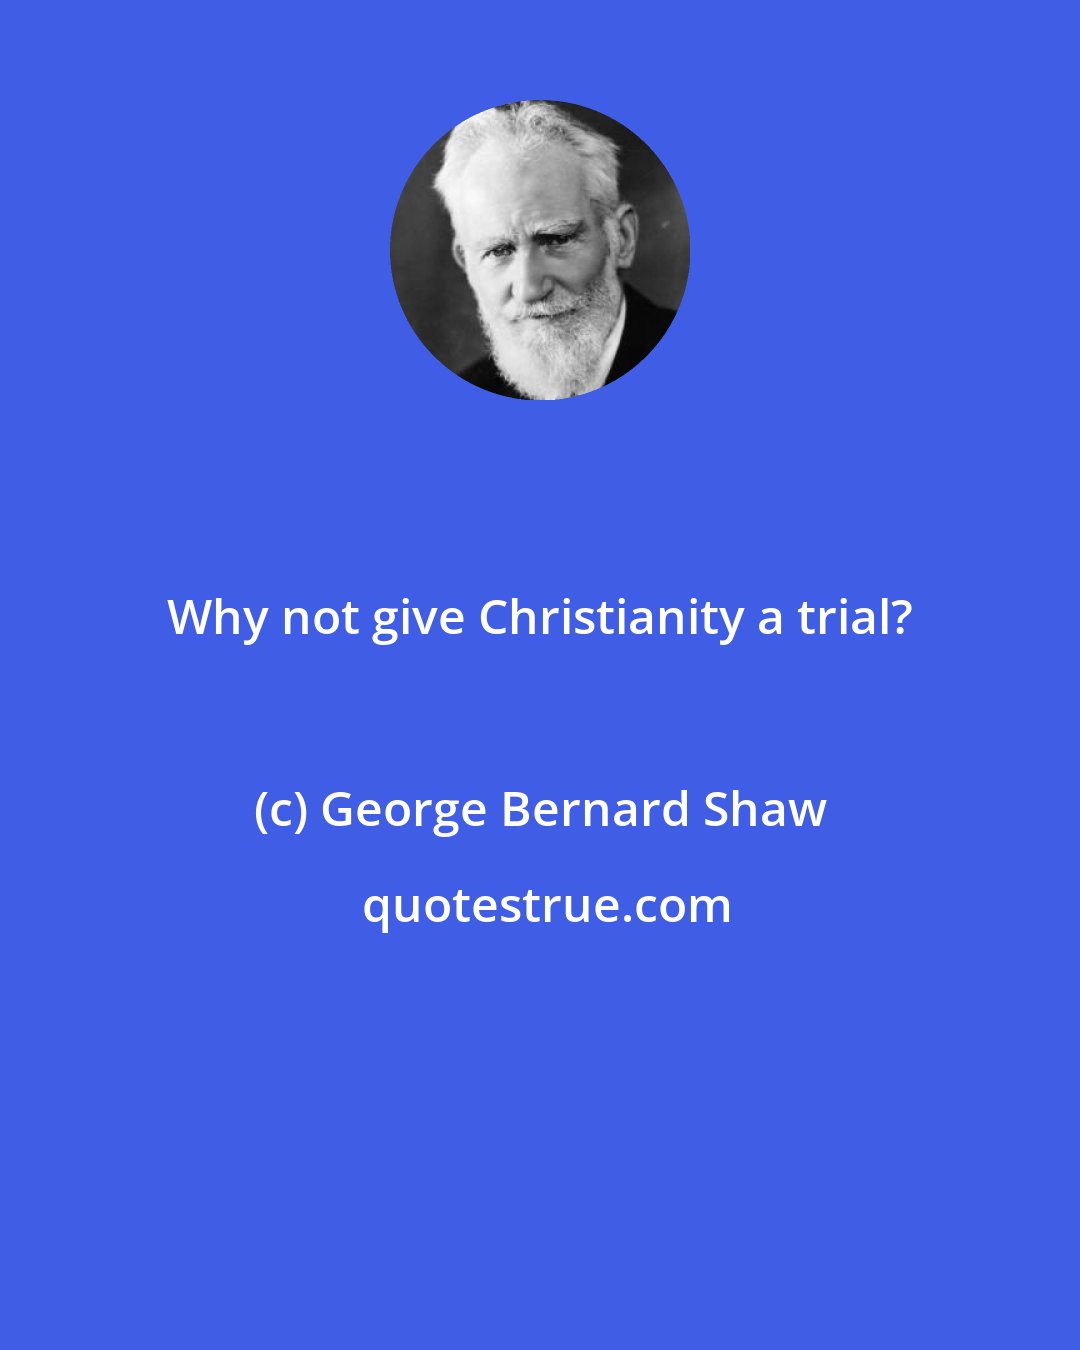 George Bernard Shaw: Why not give Christianity a trial?